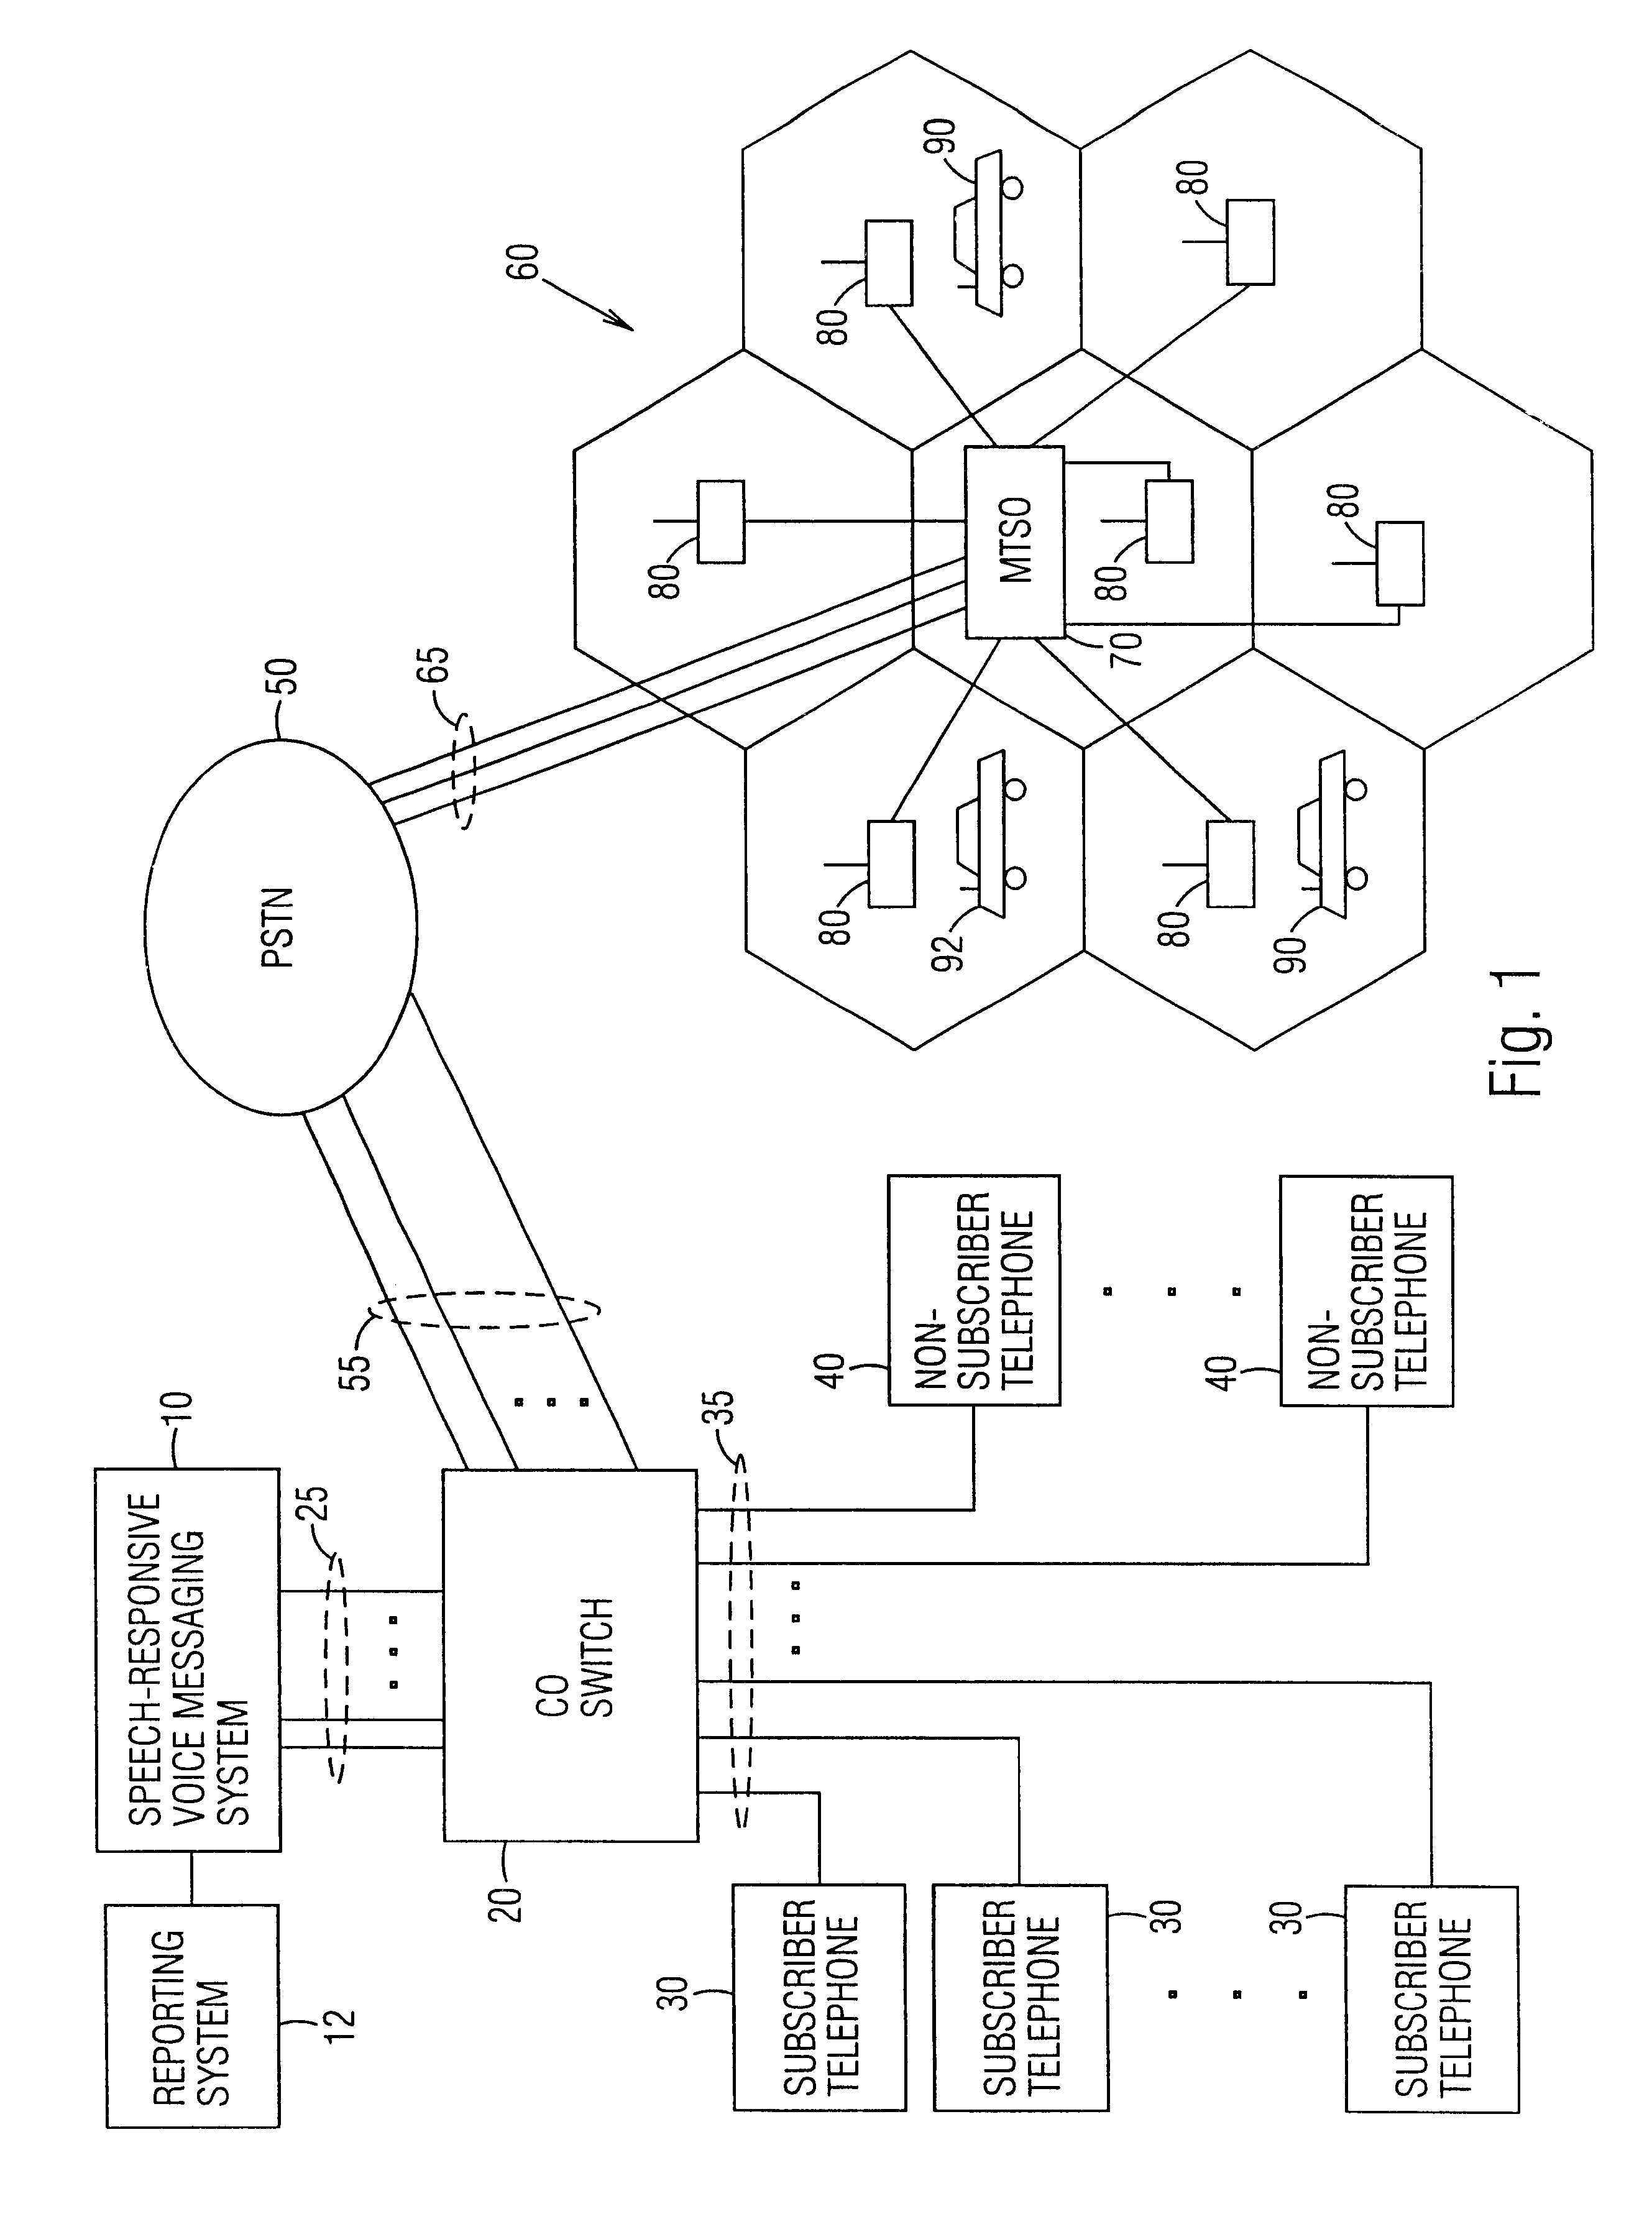 Speech-responsive voice messaging system and method